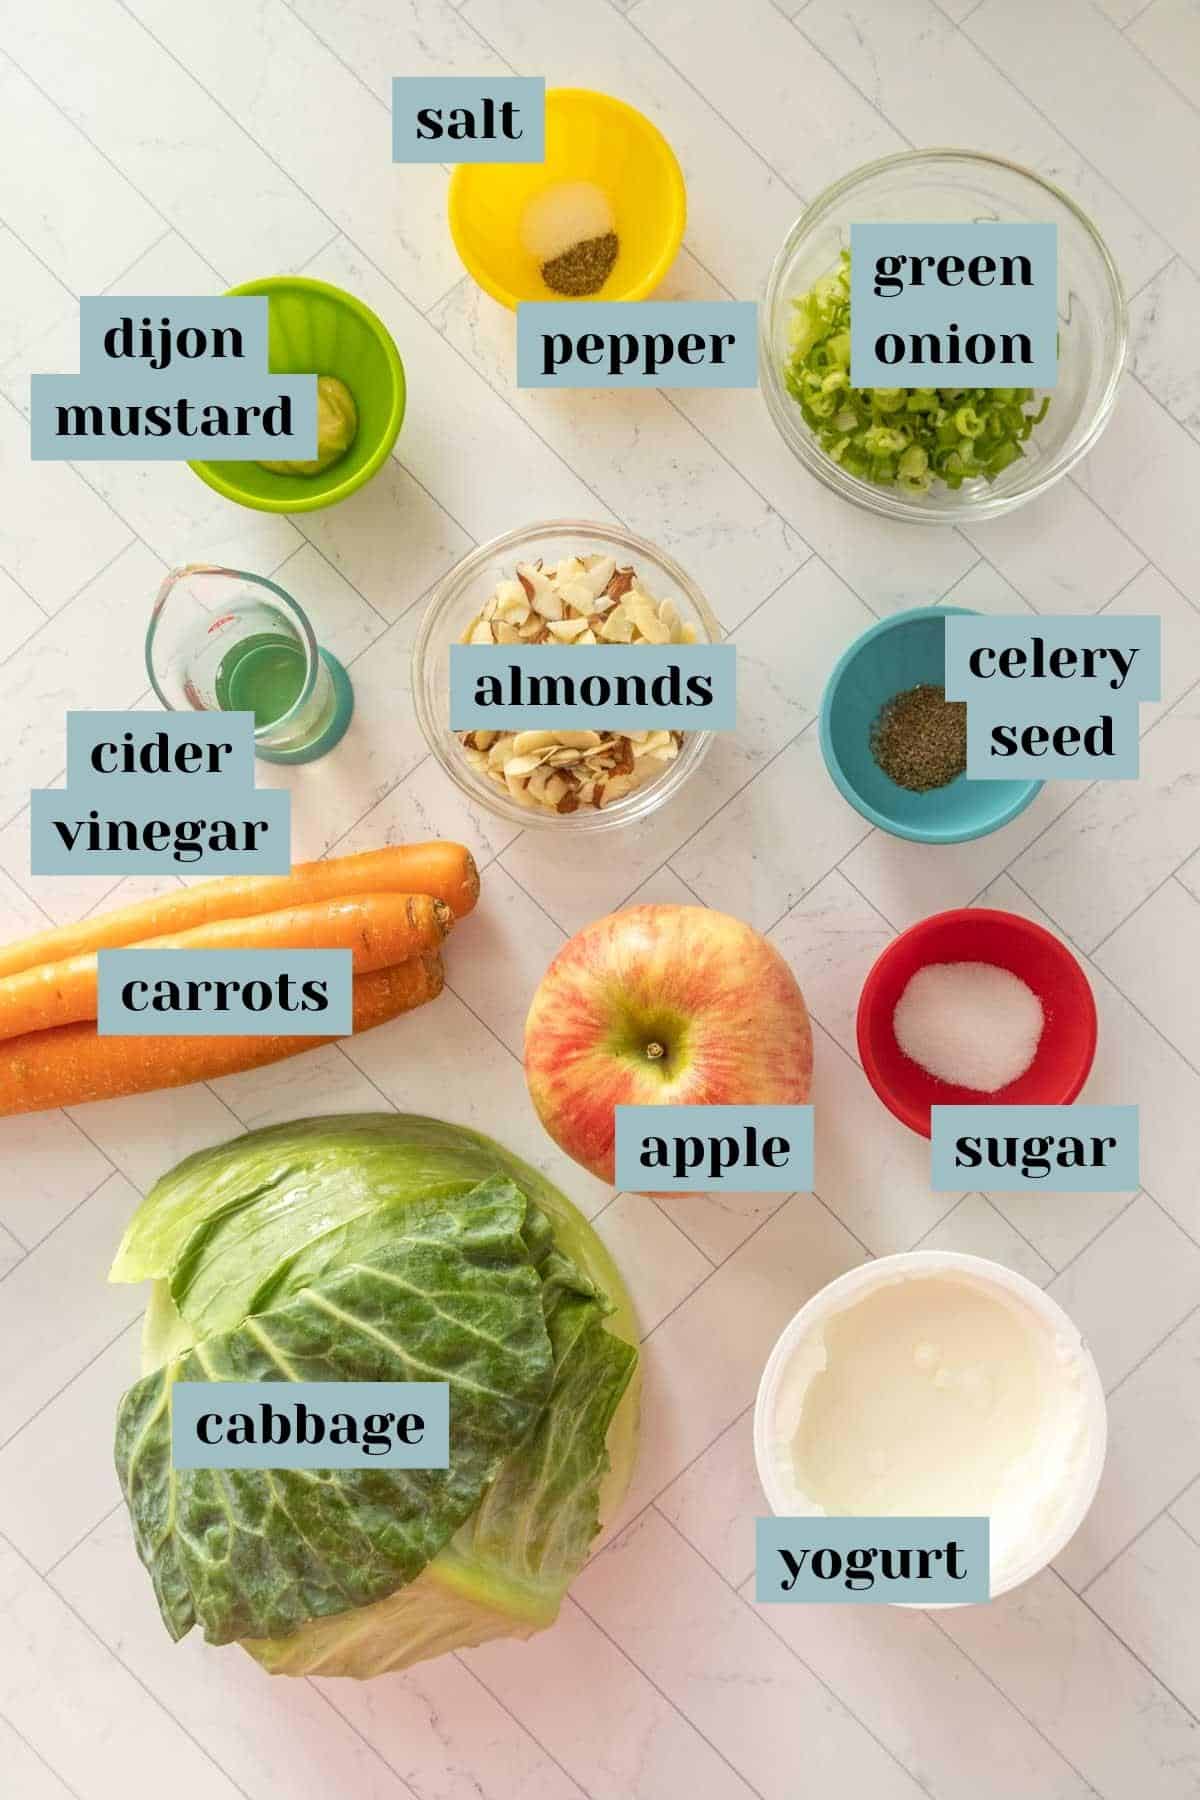 A list of ingredients for apple slaw.